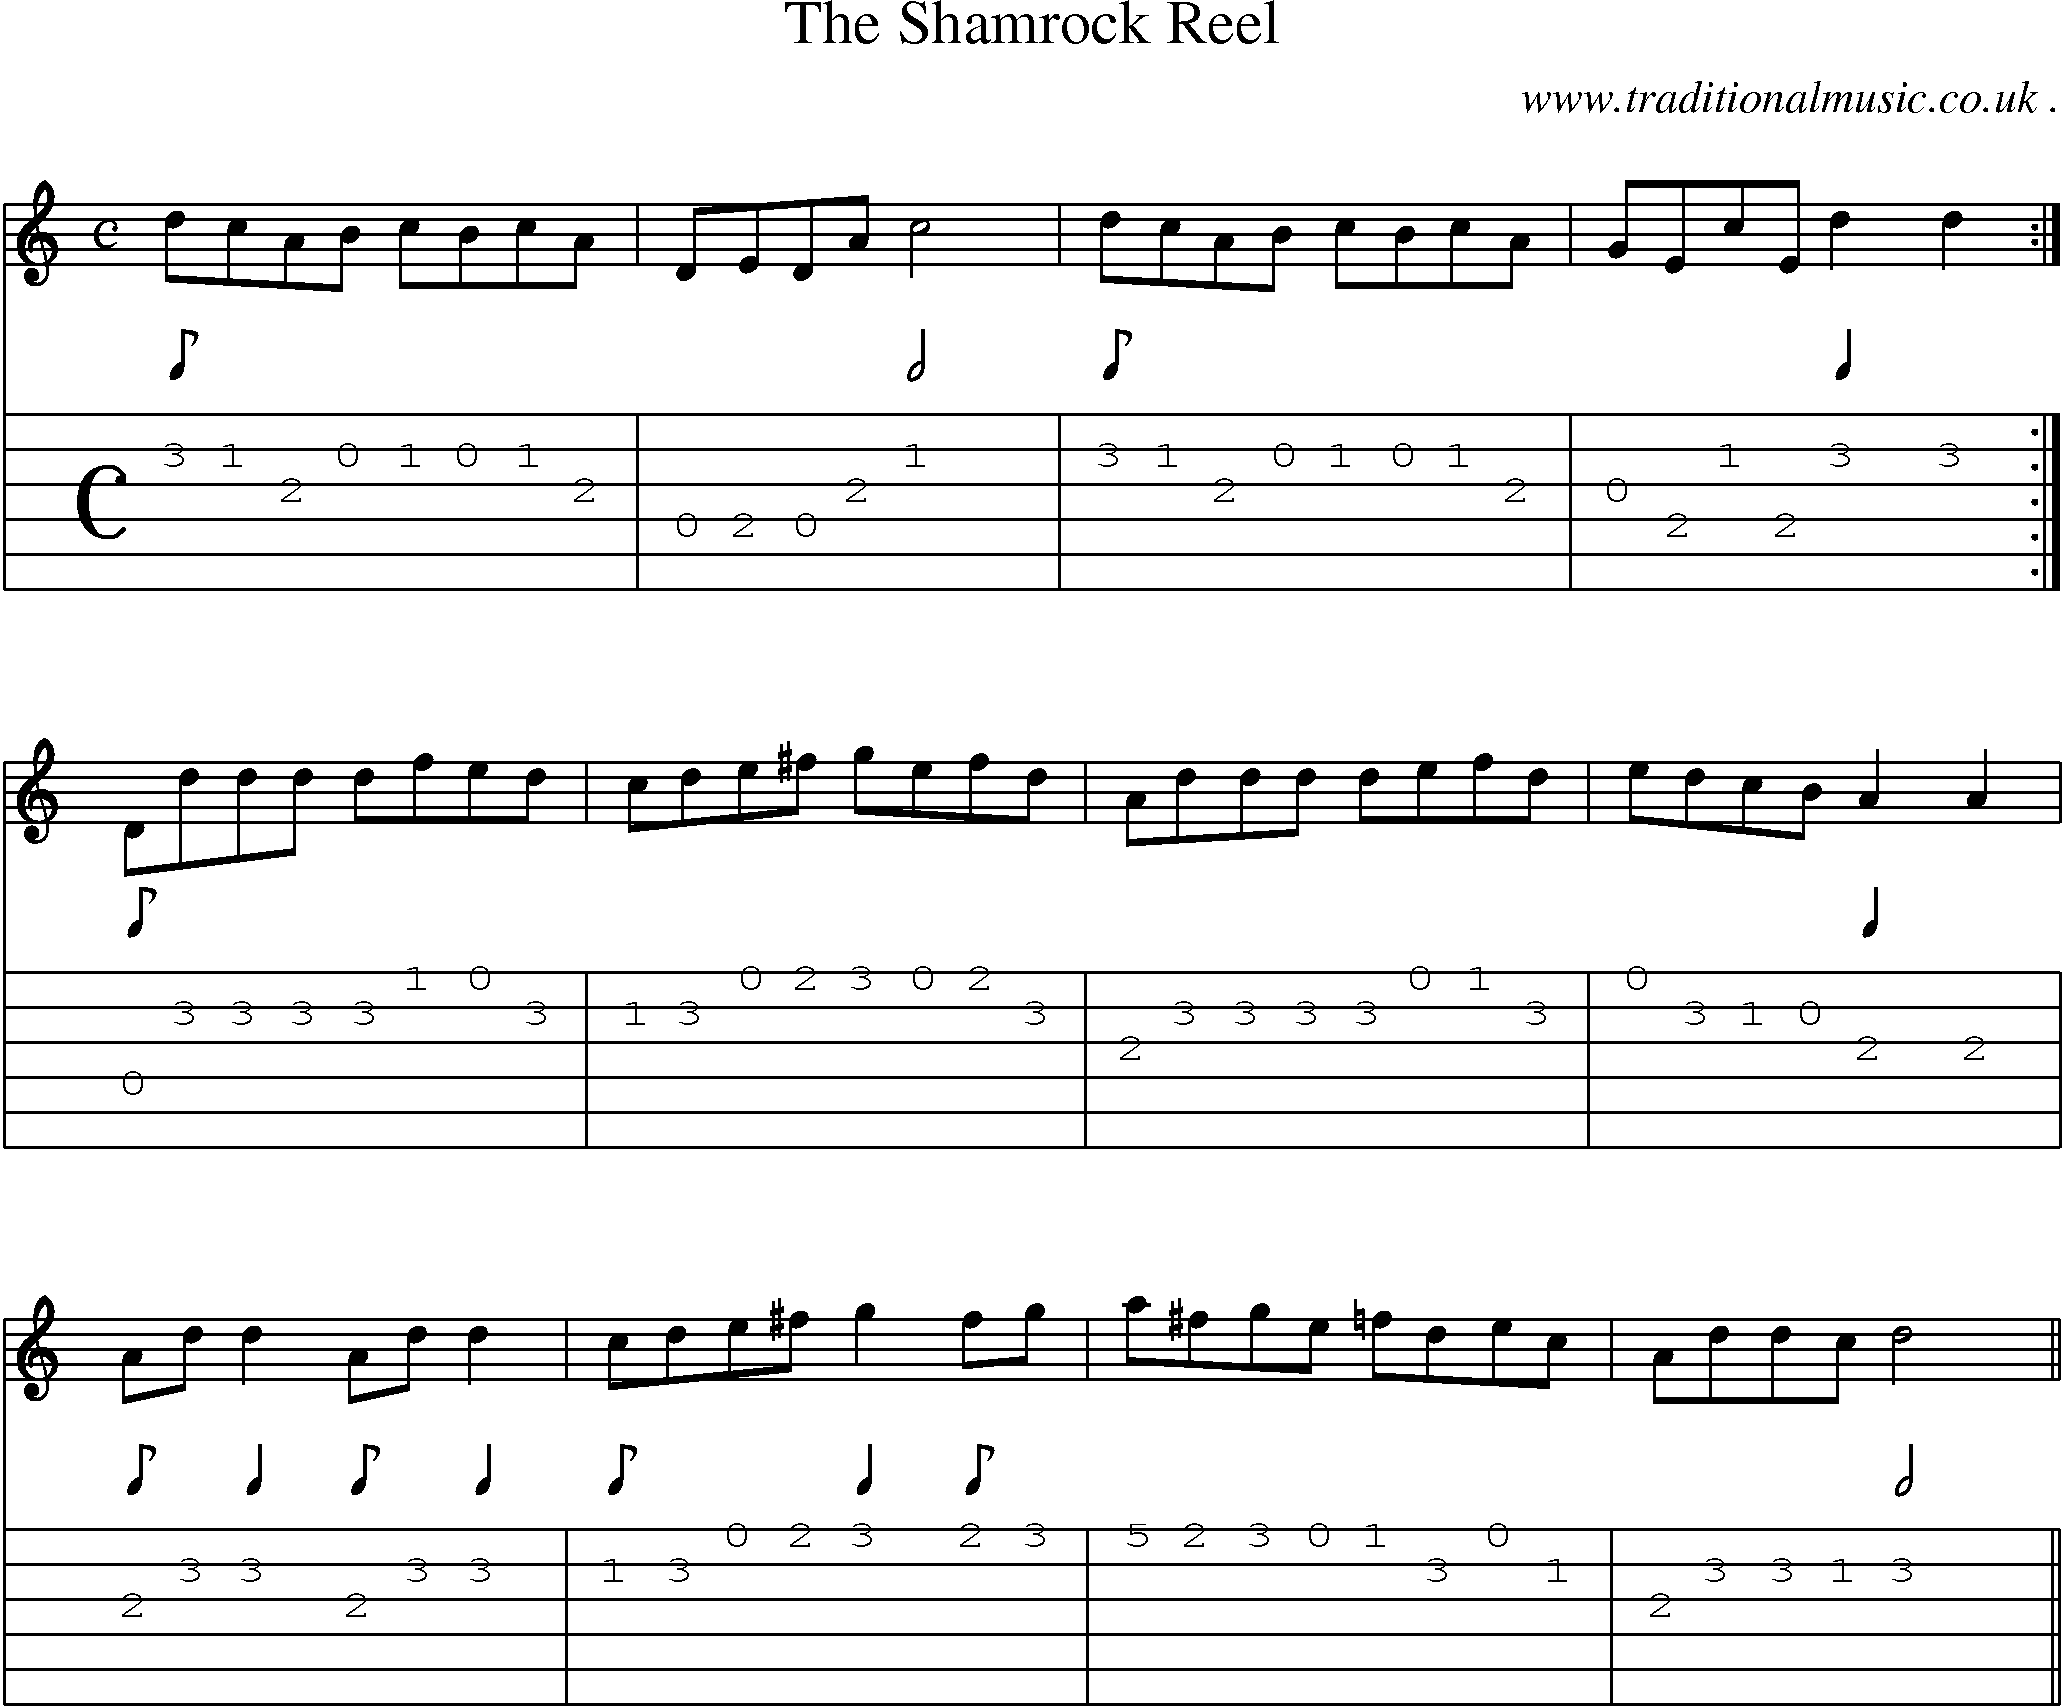 Sheet-Music and Guitar Tabs for The Shamrock Reel